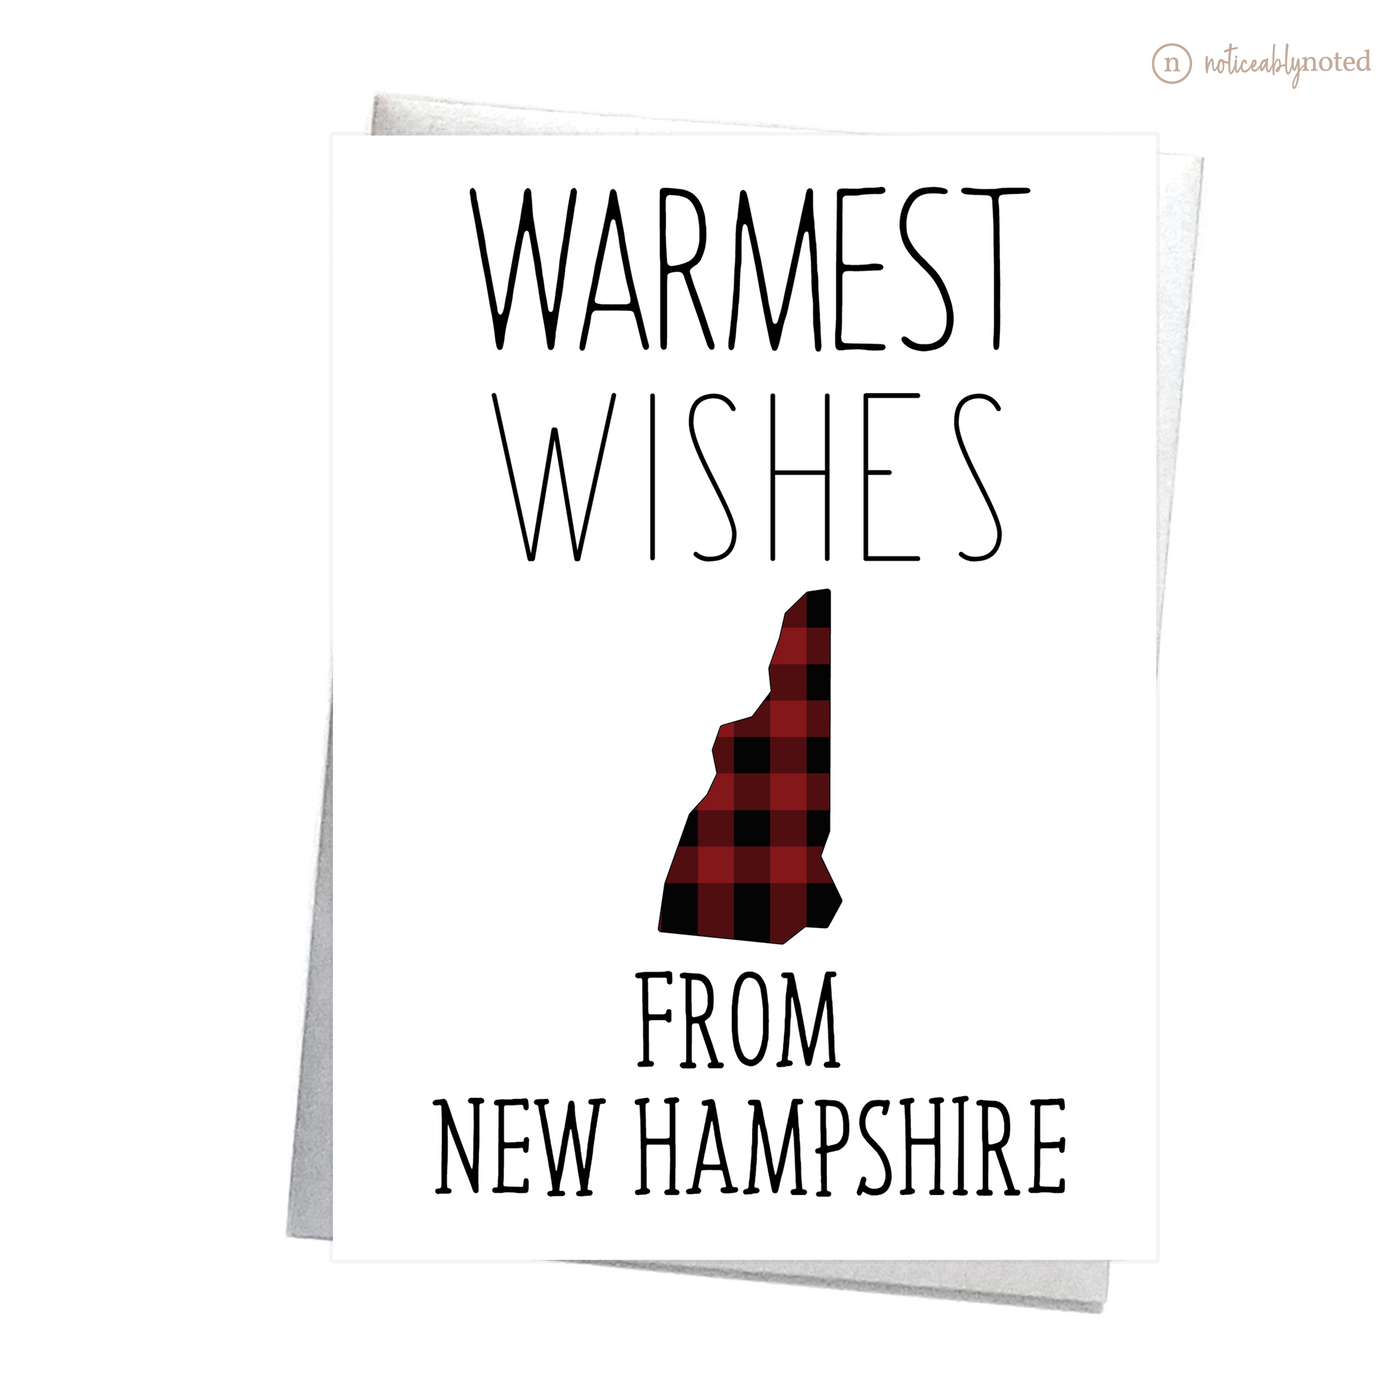 NH Holiday Greeting Cards | Noticeably Noted